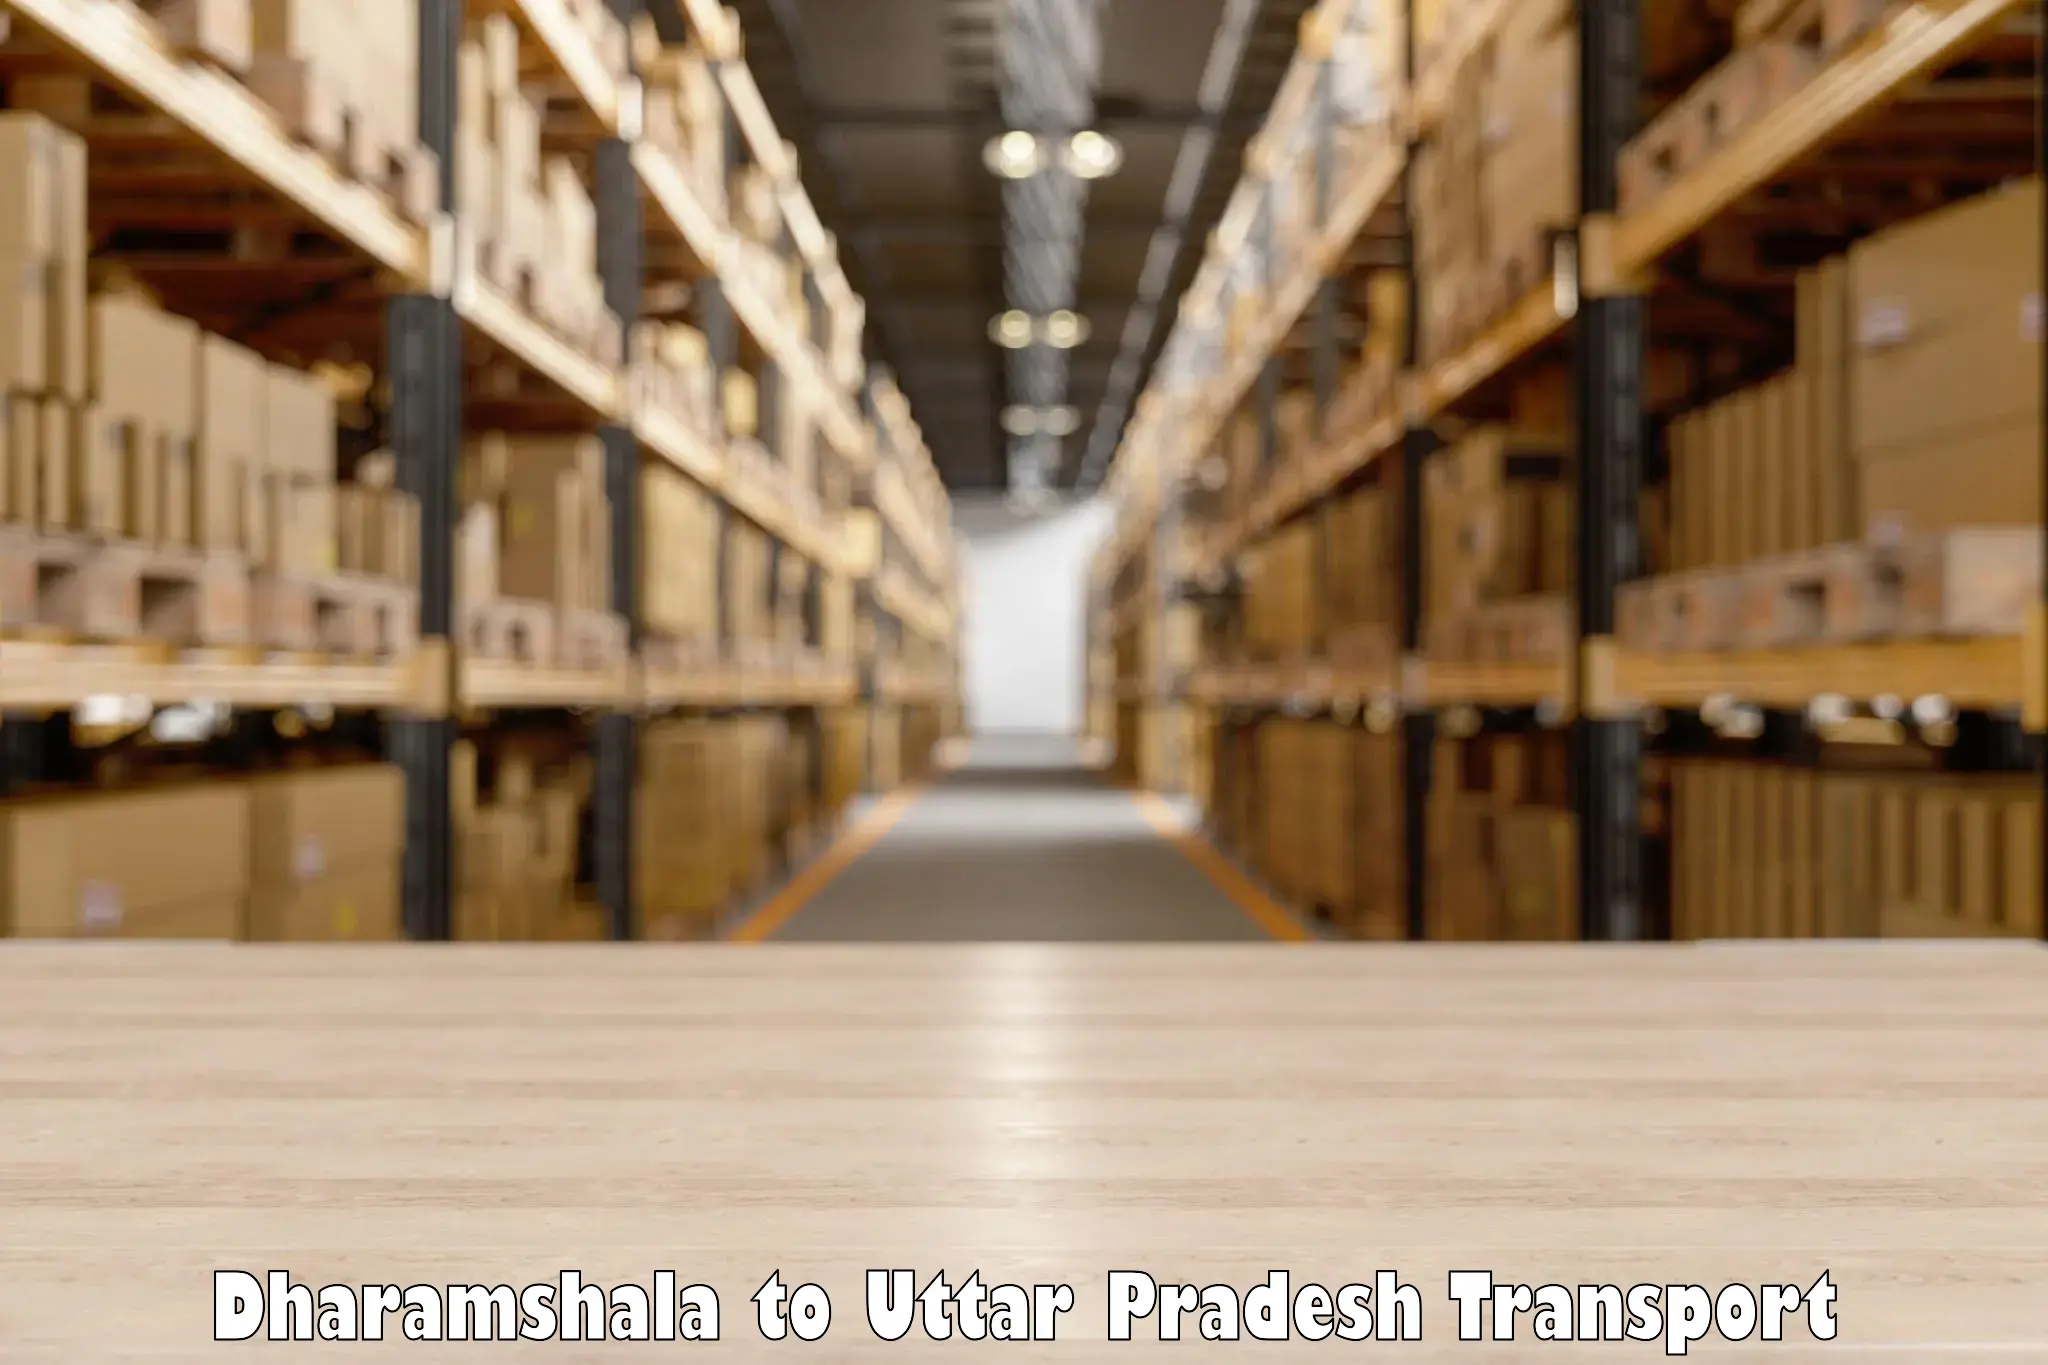 Daily parcel service transport Dharamshala to IIT Kanpur